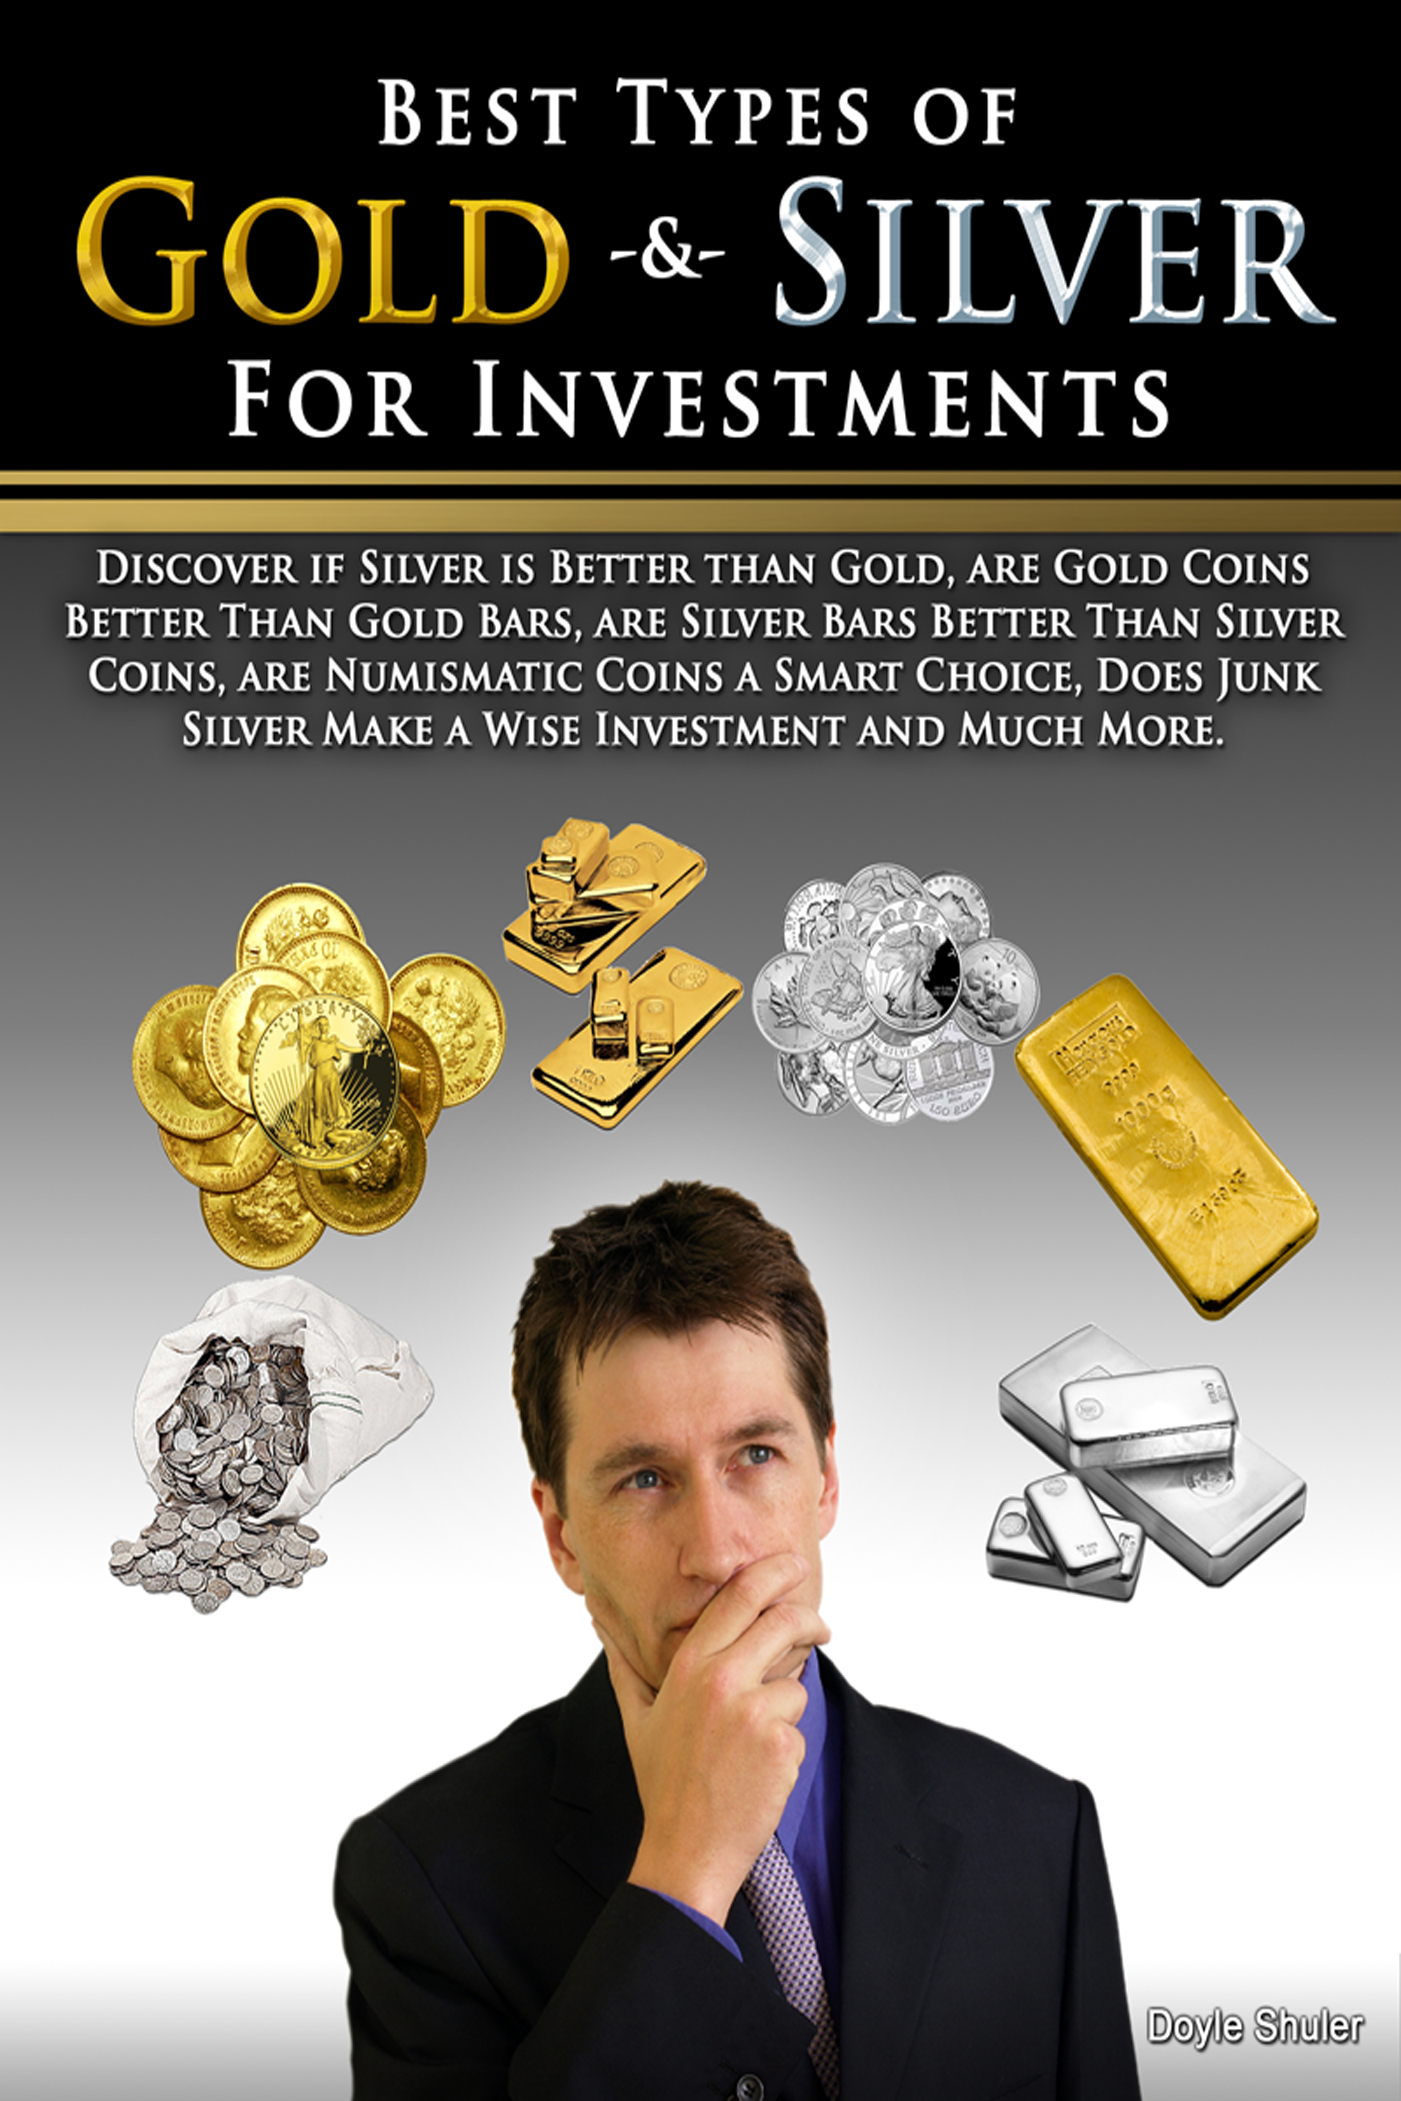 Best Silver To Buy For Investment - Invest Walls